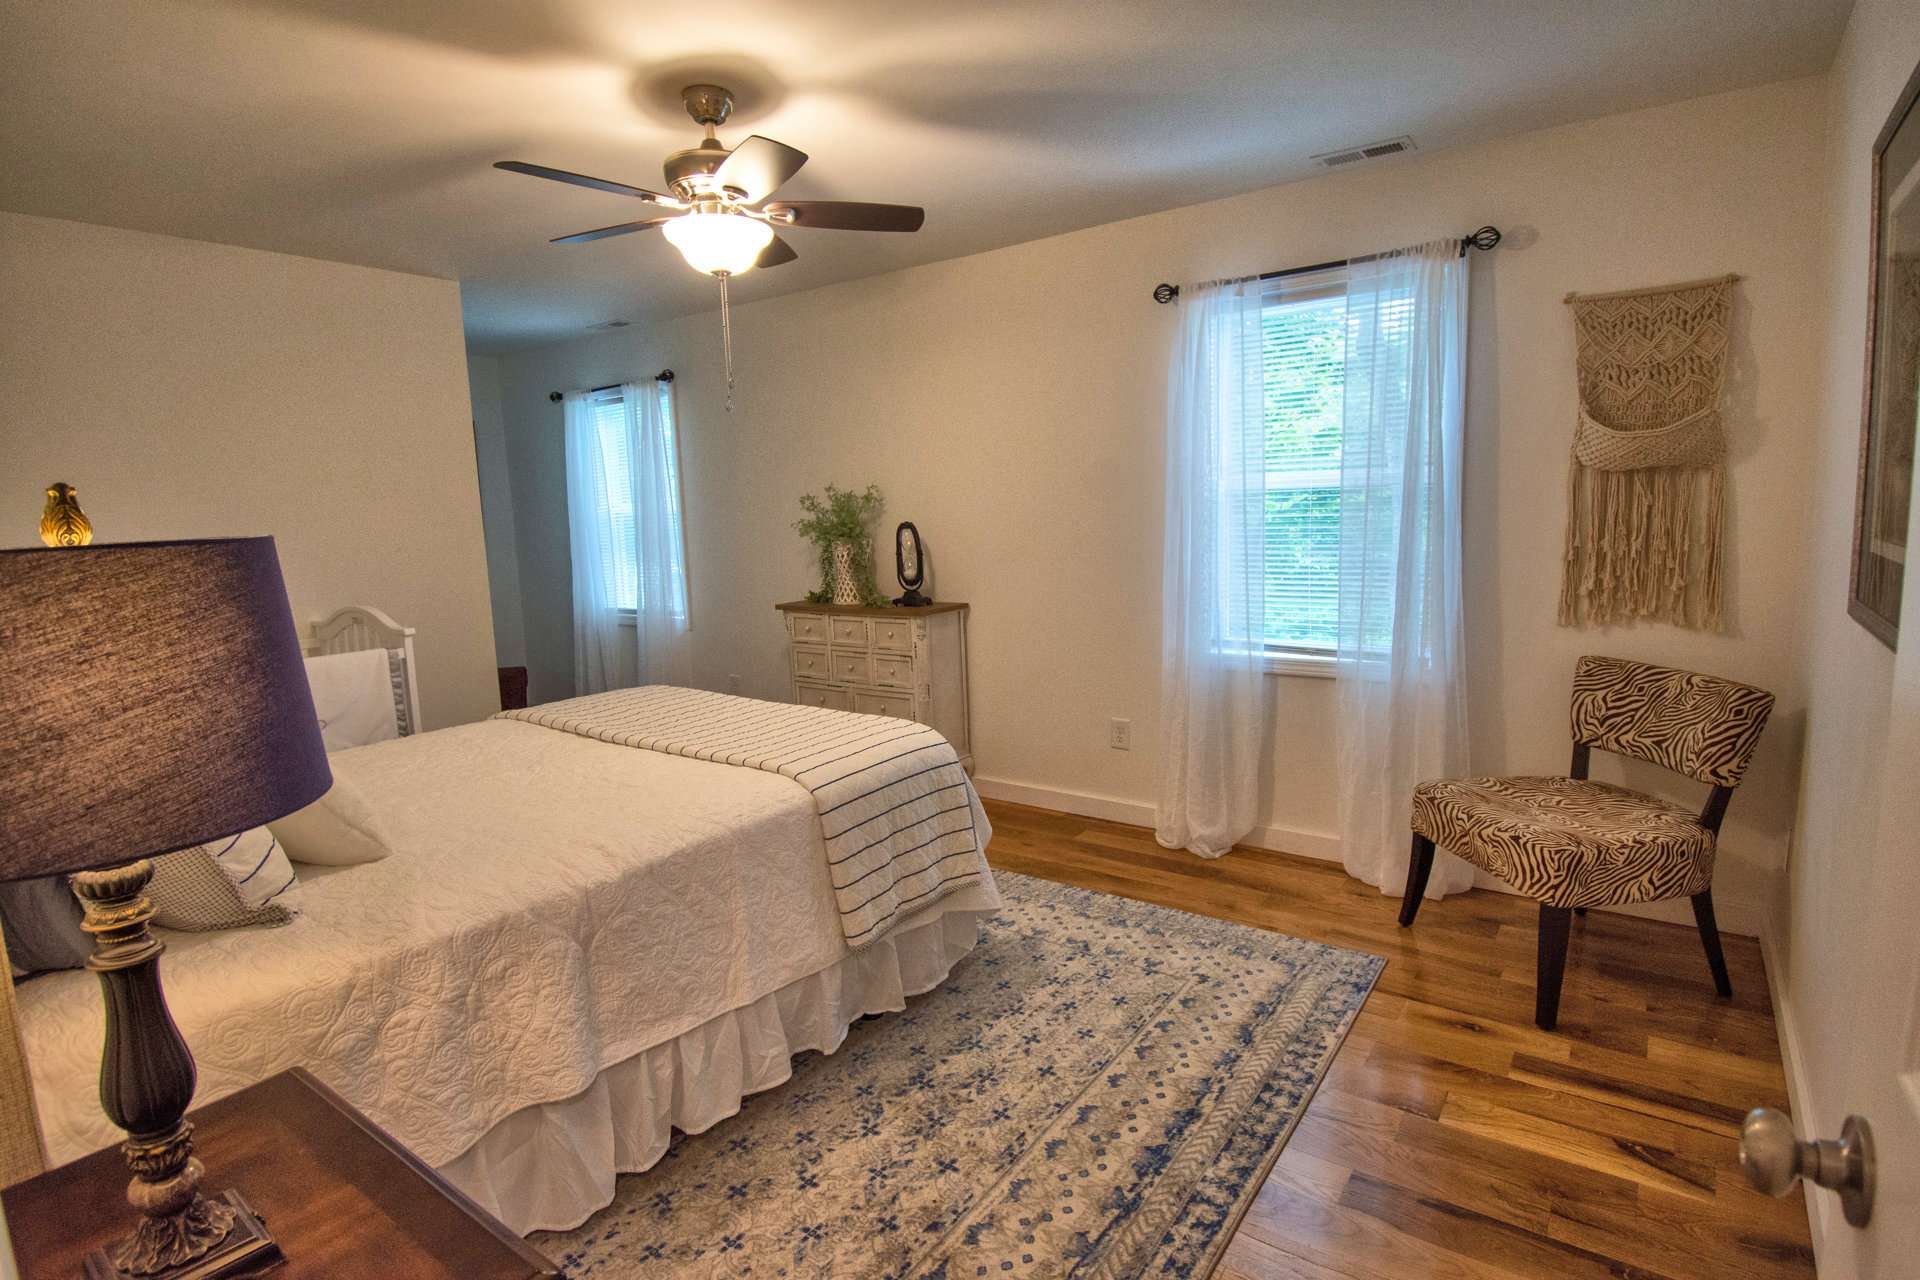 Both upper level bedrooms are generously sized and filled with natural light.